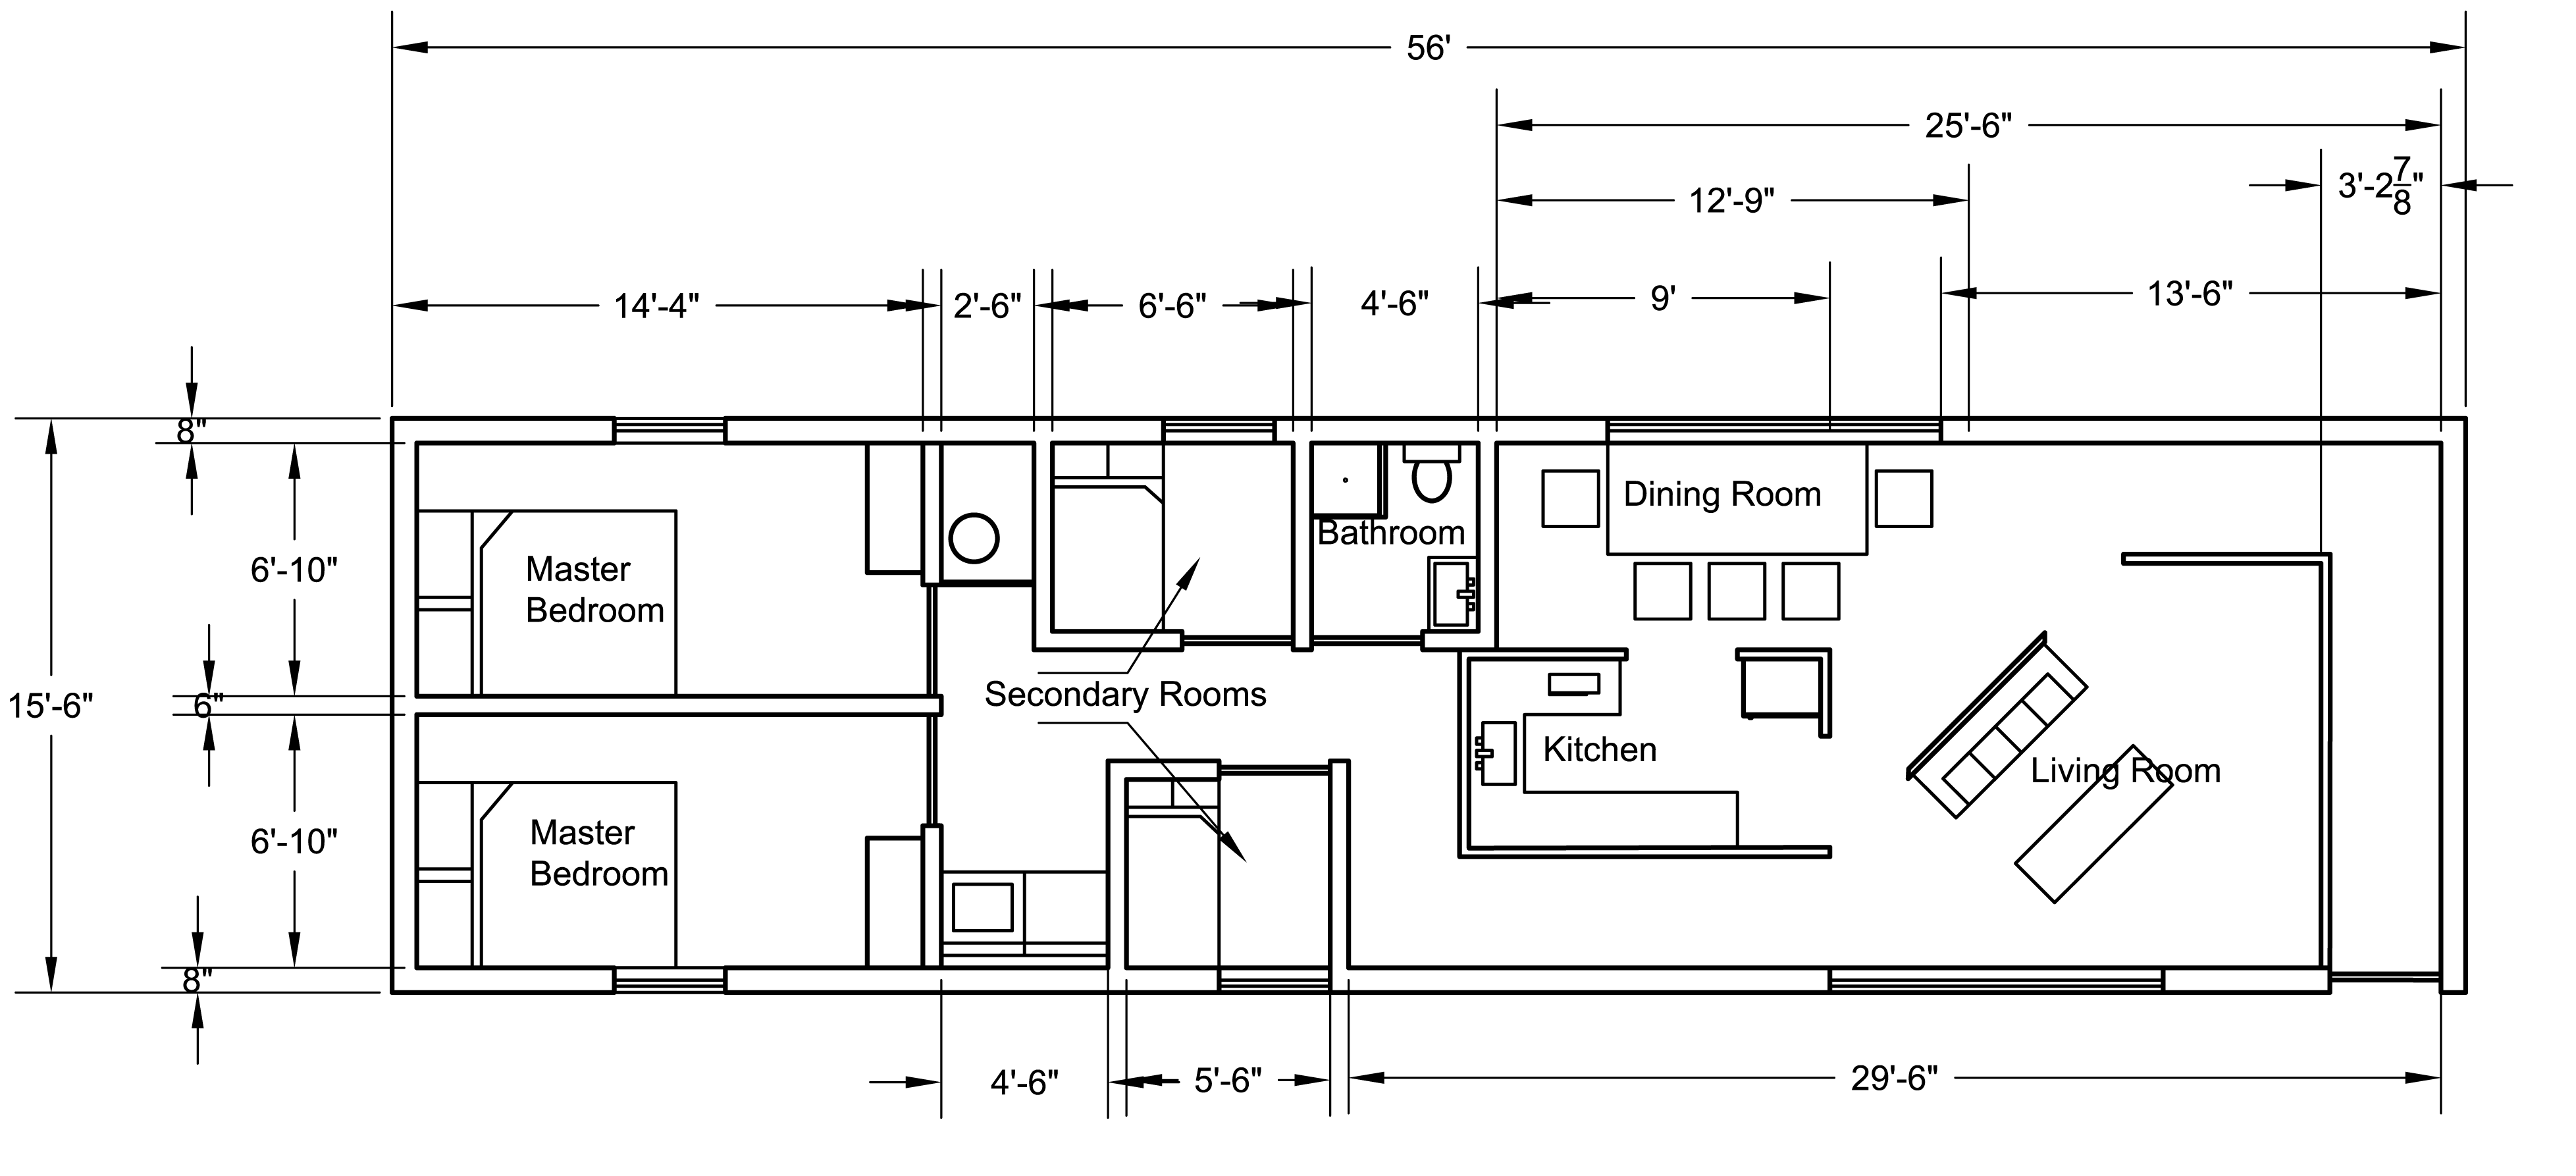 Mobile Home Floor Plan By Cloudy789 On Deviantart